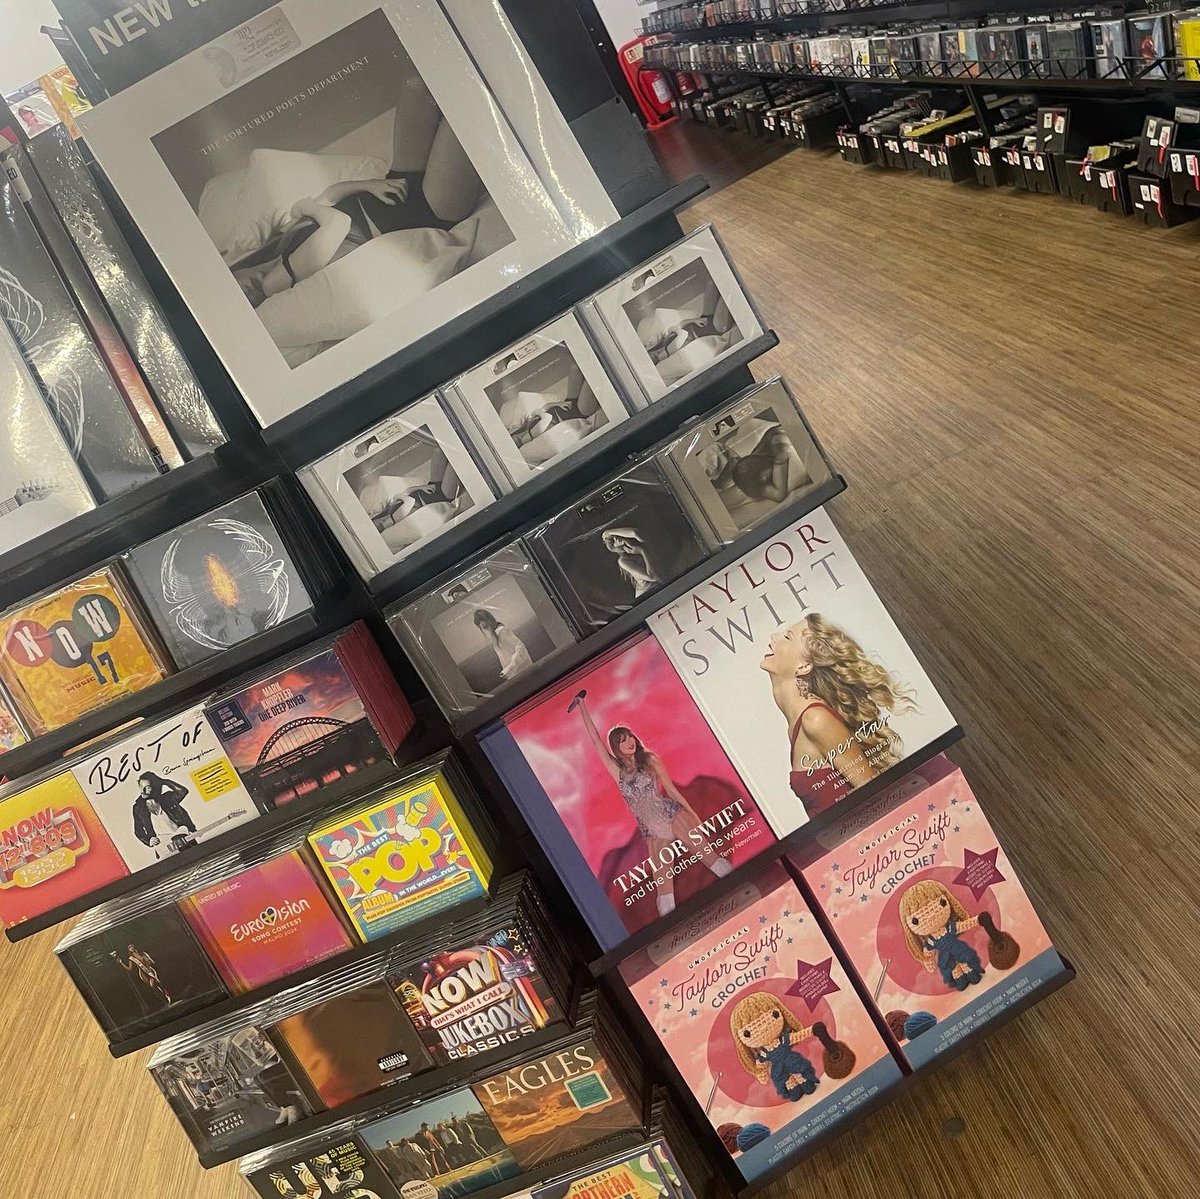 New Music Friday! Including Bruce Springsteen and new awaited music from Taylor Swift. Get your copy of The Tortured Poets Department today, including Special Edition LP’s. 🩶🖋️🫶🏻✨ #hmv #hmvluton #newmusicfriday #taylorswift #thetorturedpoetsdepartment @hmvtweets